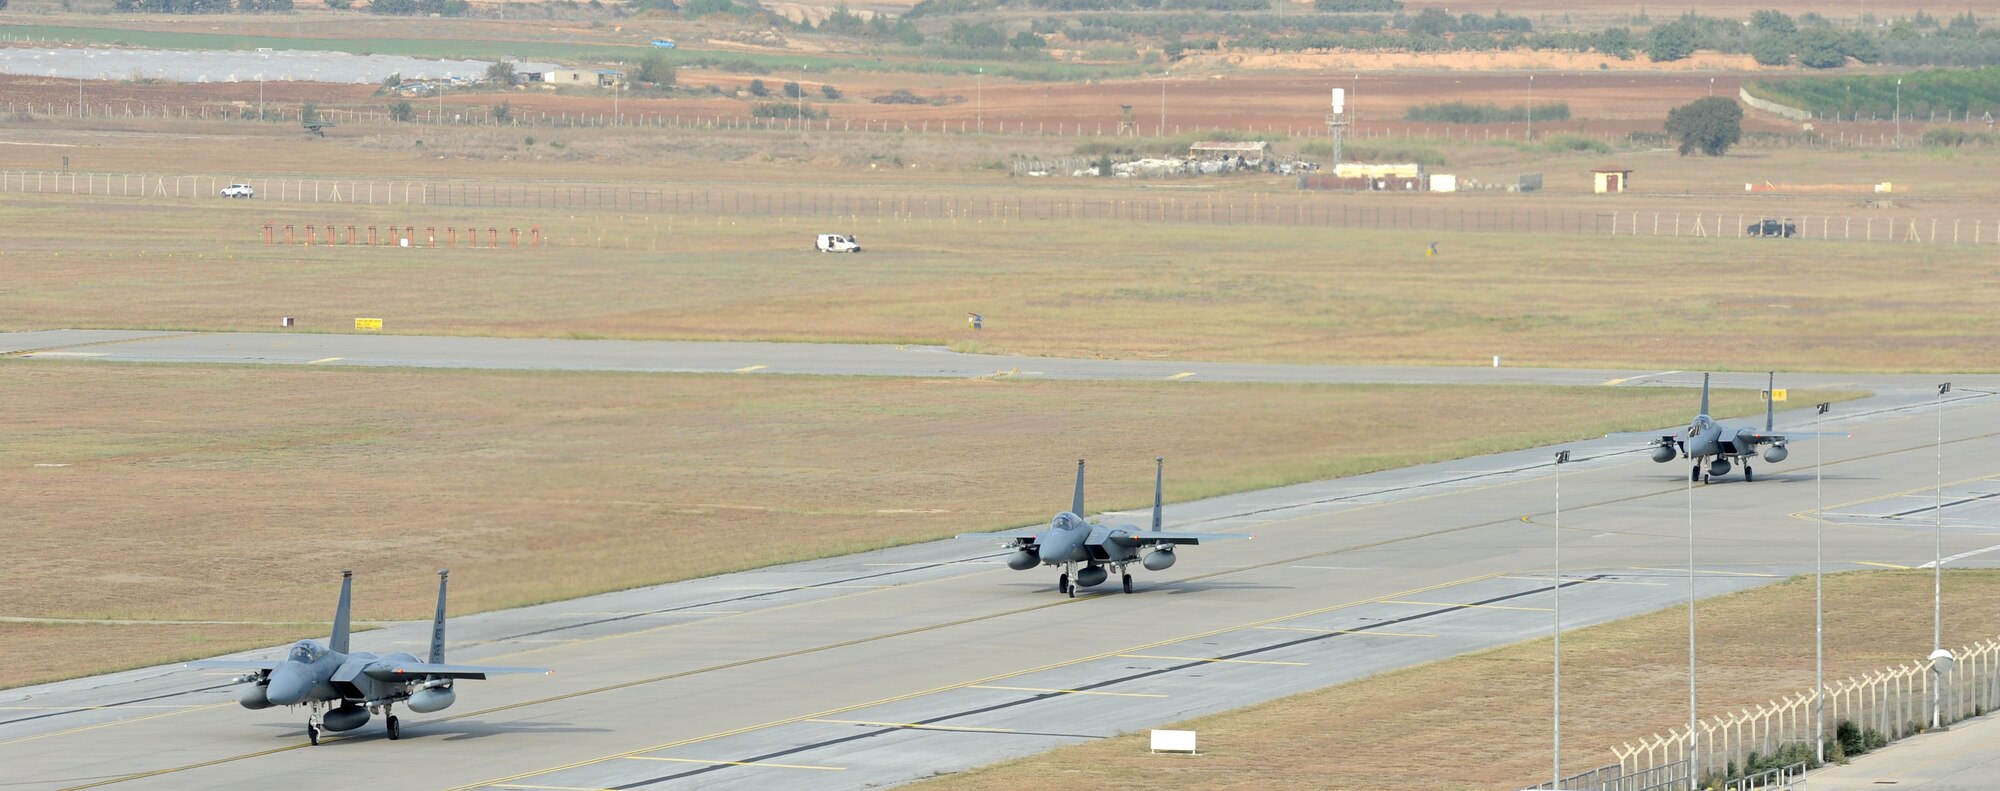 Three F-15C Eagles from the 493rd Fighter Squadron at RAF Lakenheath, UK, taxi the flight line at Incirlik Air Base, Turkey, Nov. 6, 2015. Six F-15Cs are deployed to conduct combat air patrols in Turkish air space. (U.S. Air Force photo by Tech. Sgt. Taylor Worley/Released)